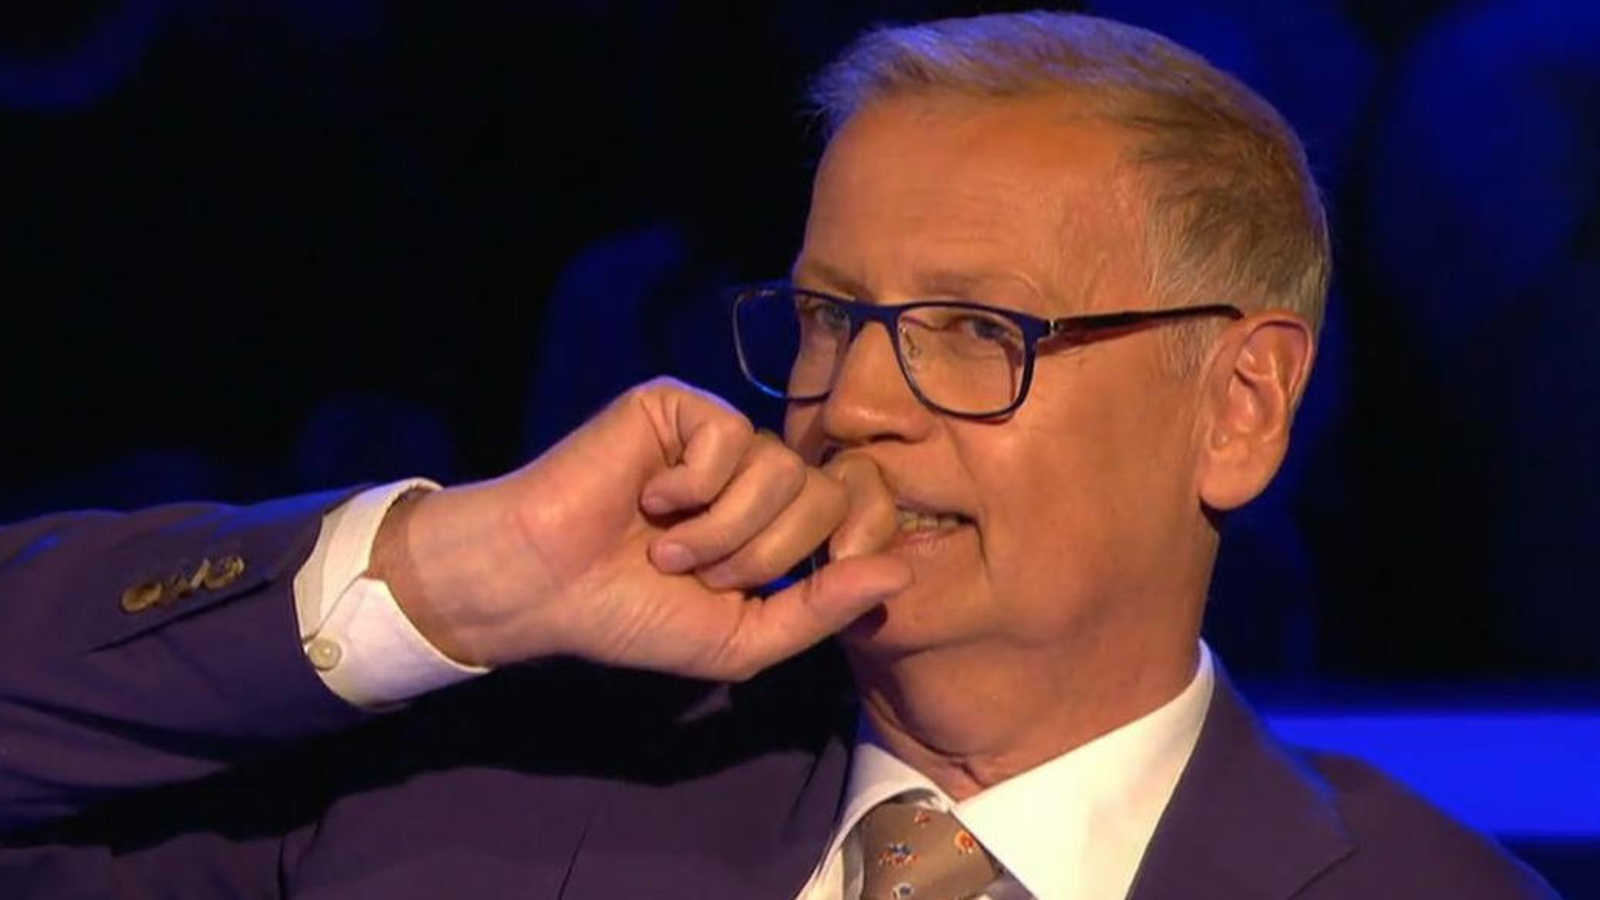 The candidate elicits Jauch’s strict anti-fraud rule “Who Wants to Be a Millionaire?”